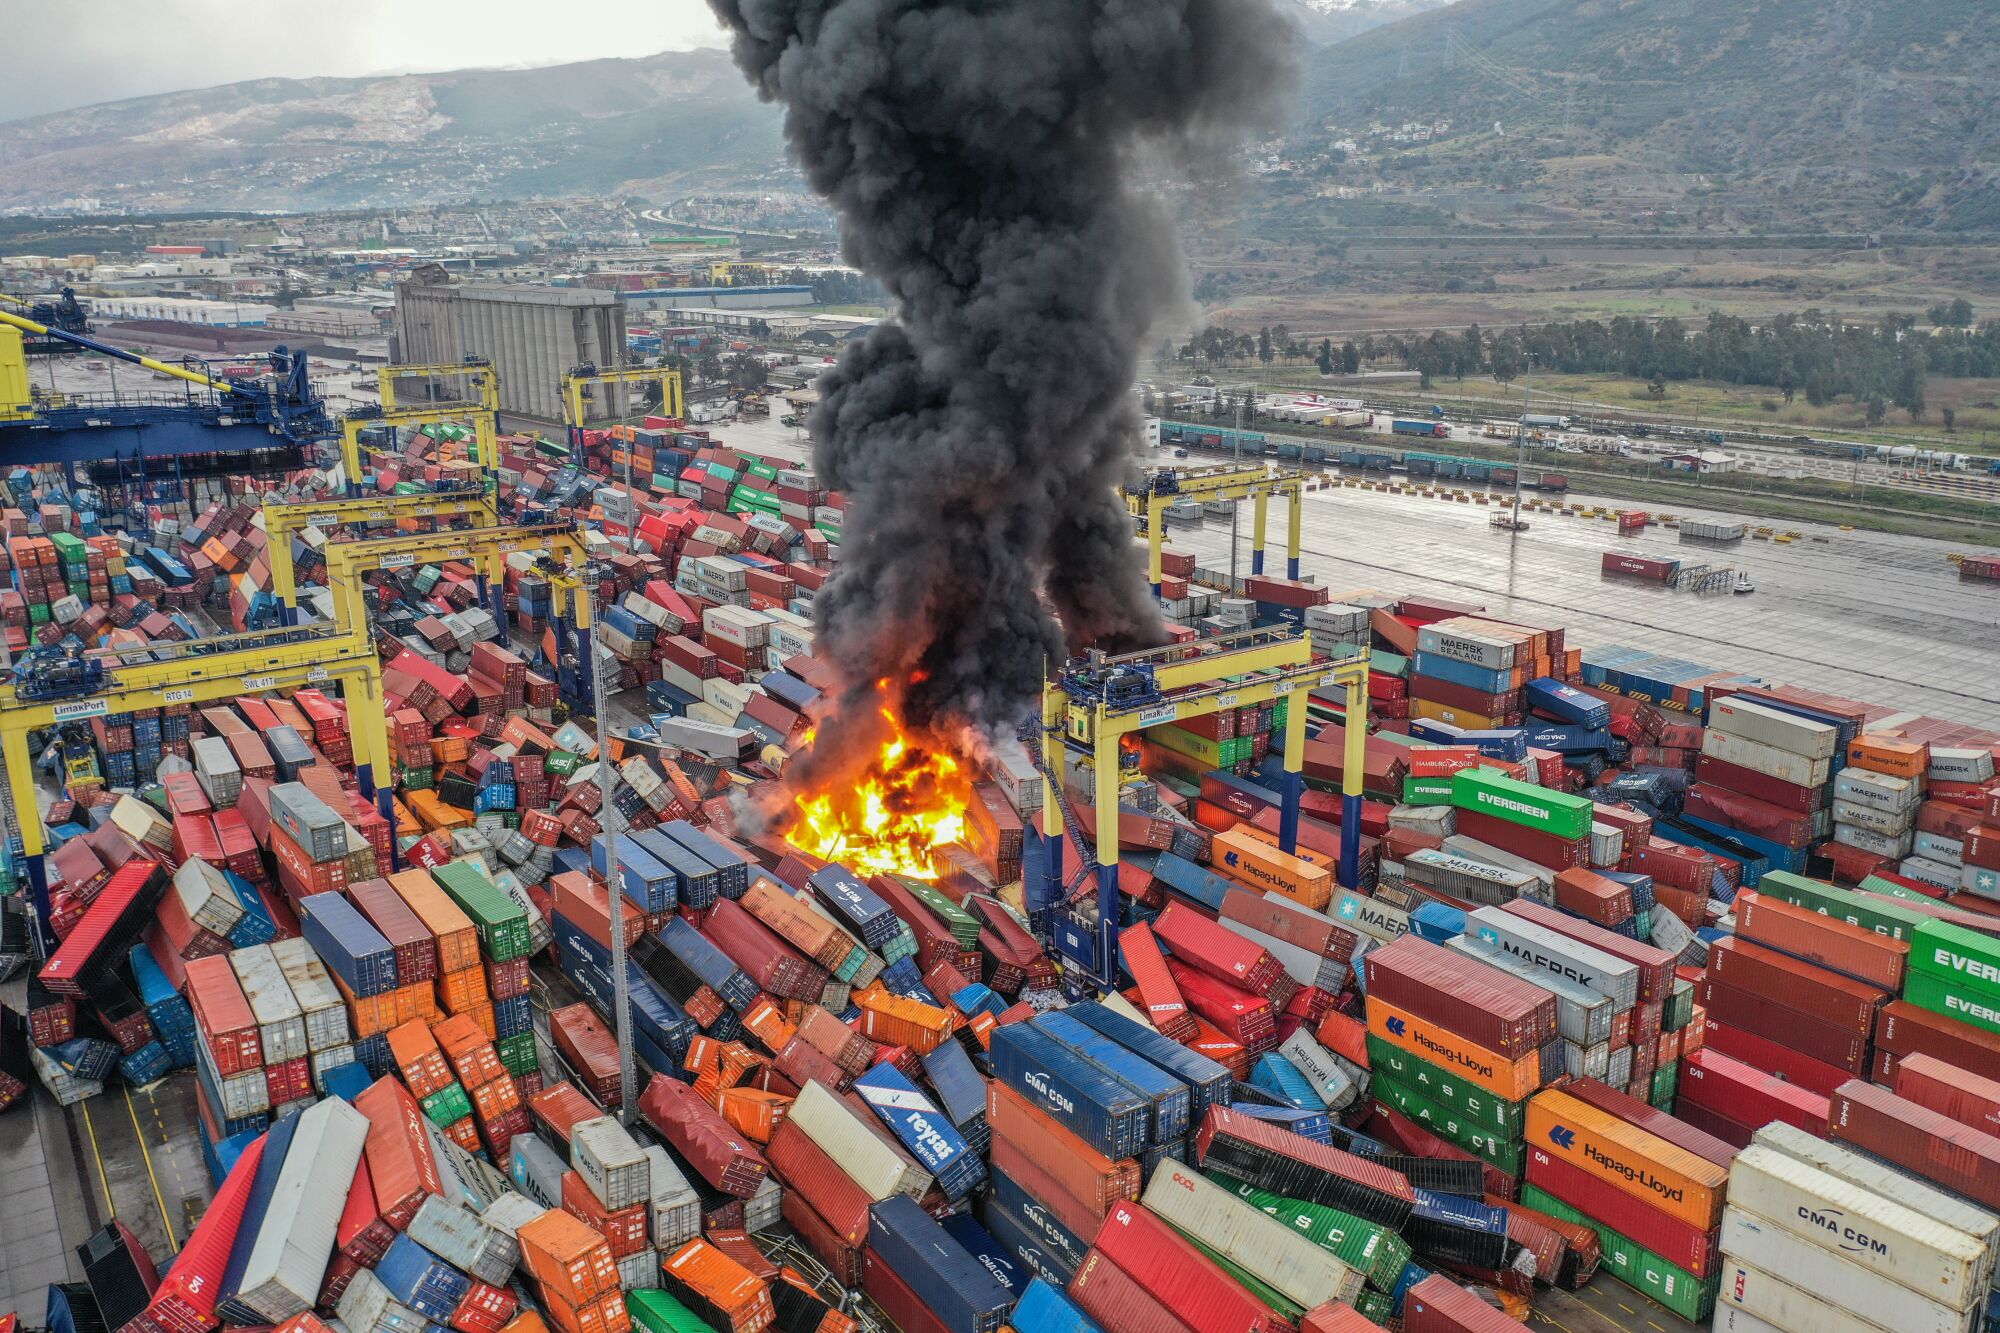 An aerial view of fire in overturned containers following the magnitude 7.8 earthquake in Hatay, Turkey.